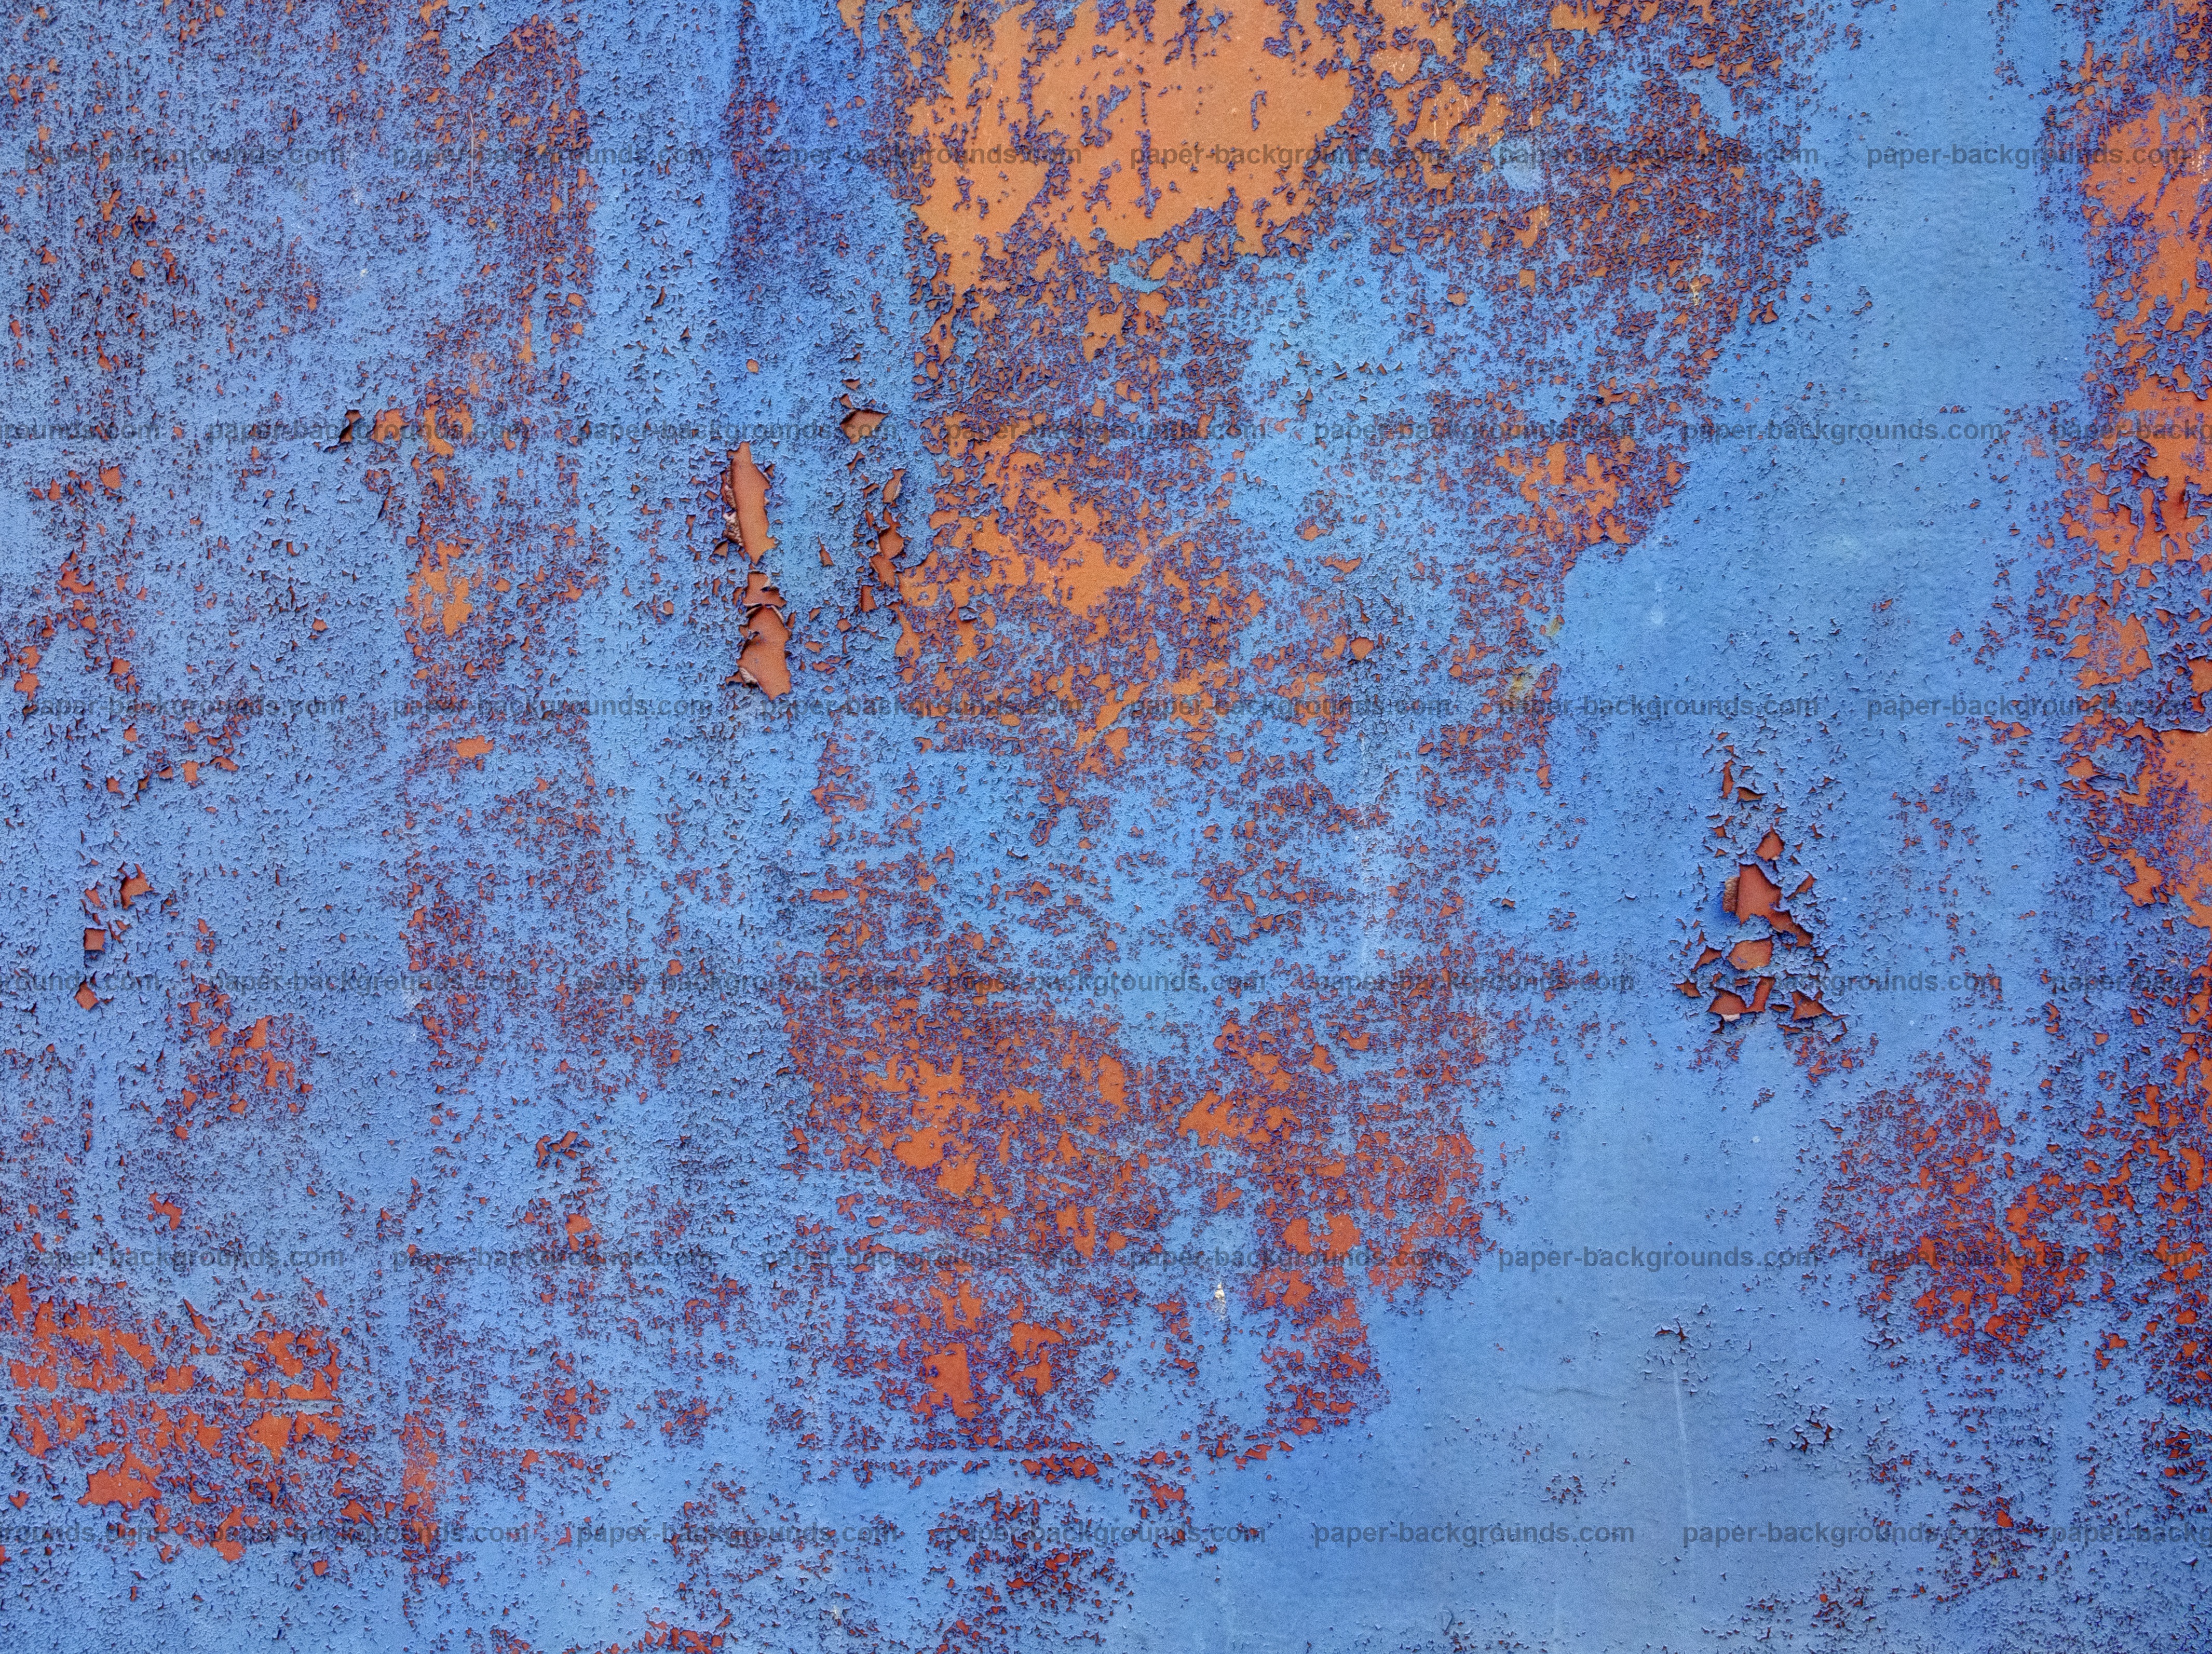 Paper Backgrounds | Blue Orange Rugged Rusty Metal Texture